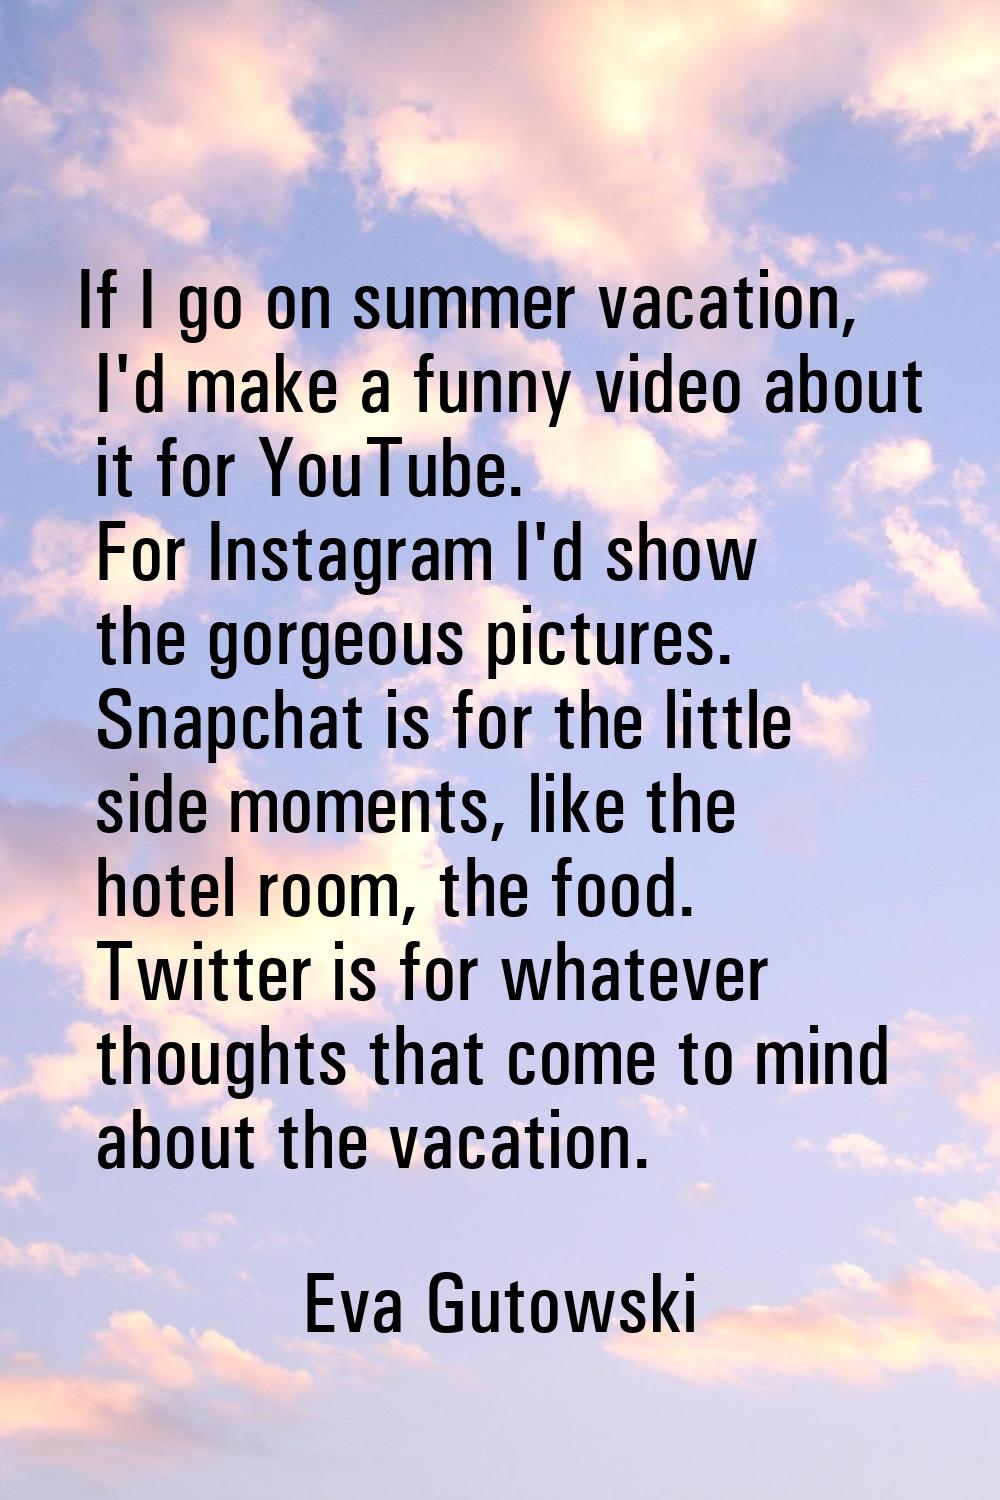 If I go on summer vacation, I'd make a funny video about it for YouTube. For Instagram I'd show the